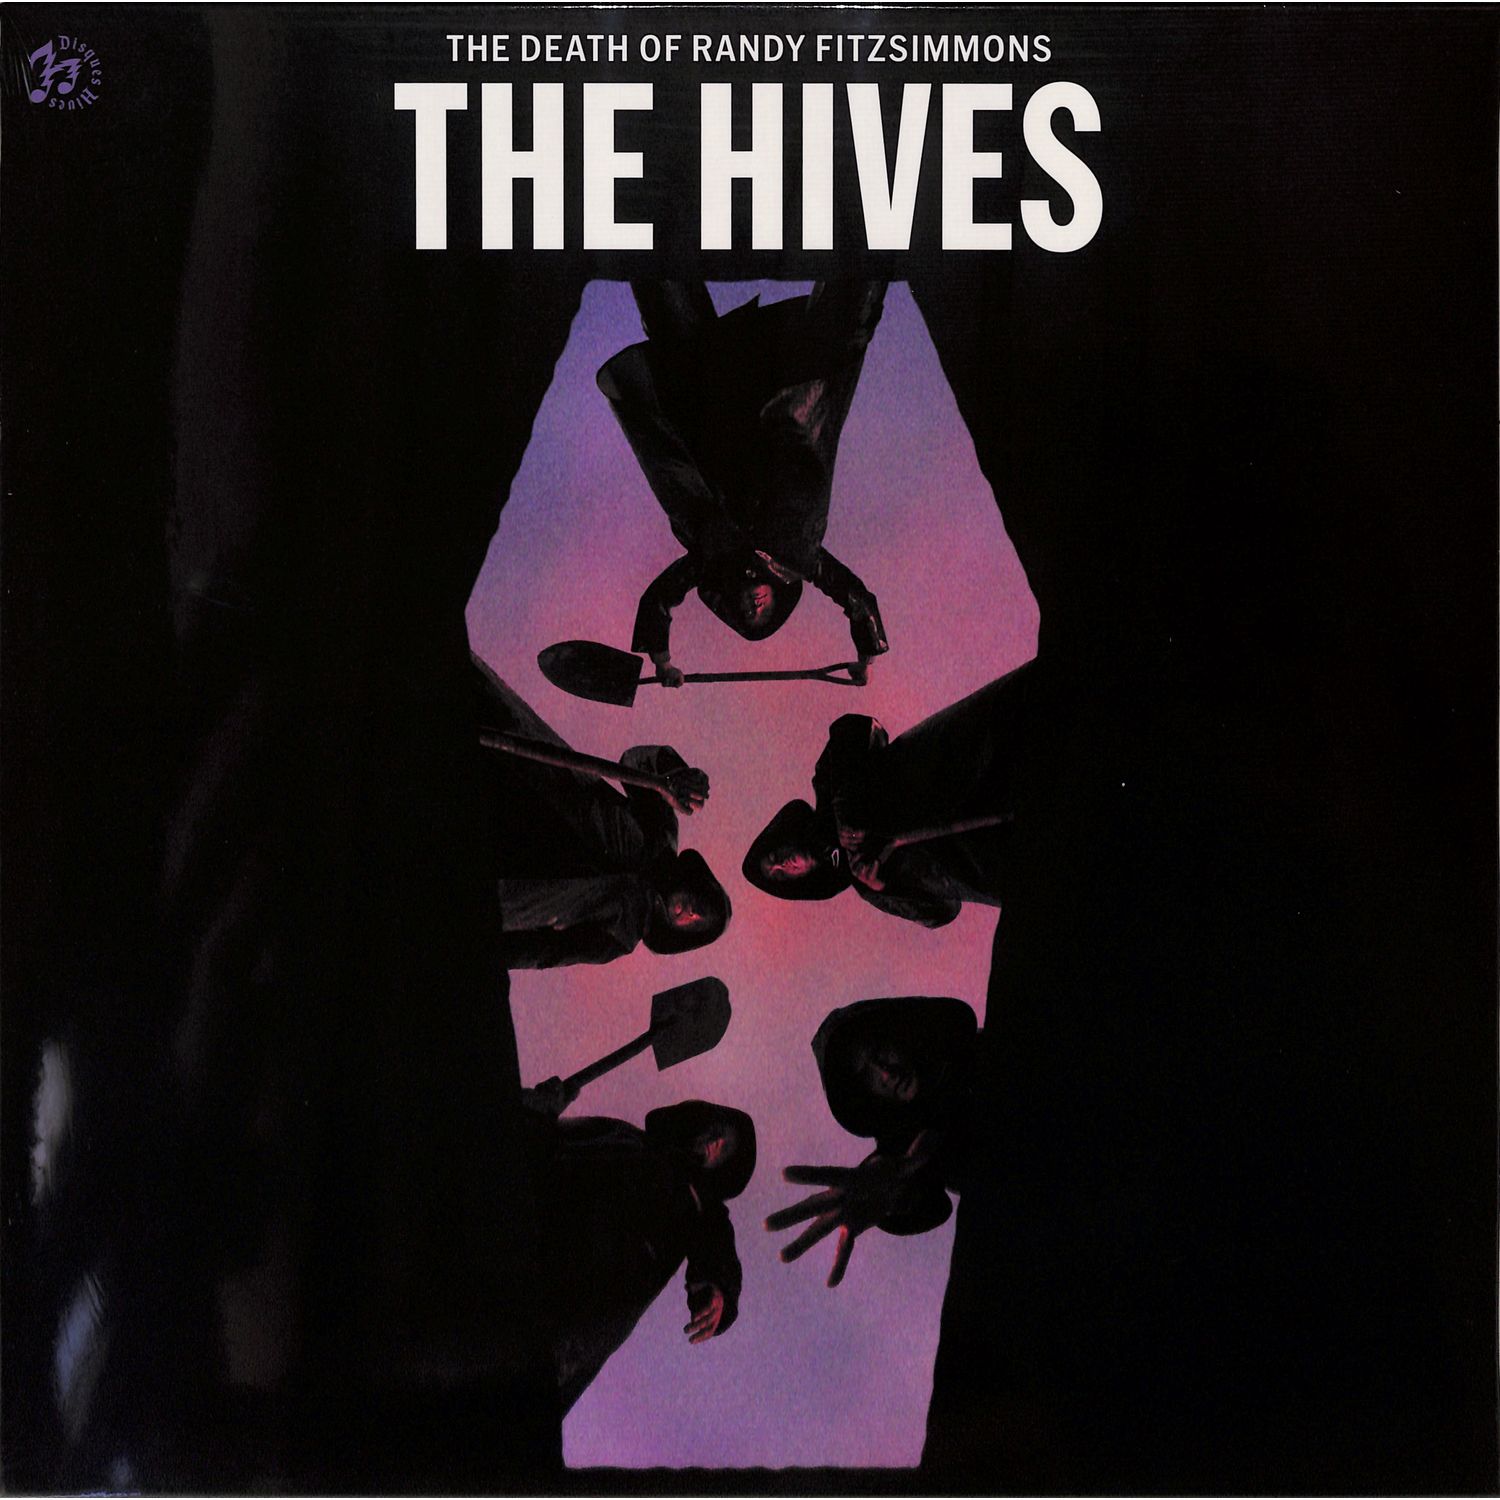 Hives - THE DEATH OF RANDY FITZSIMMONS 